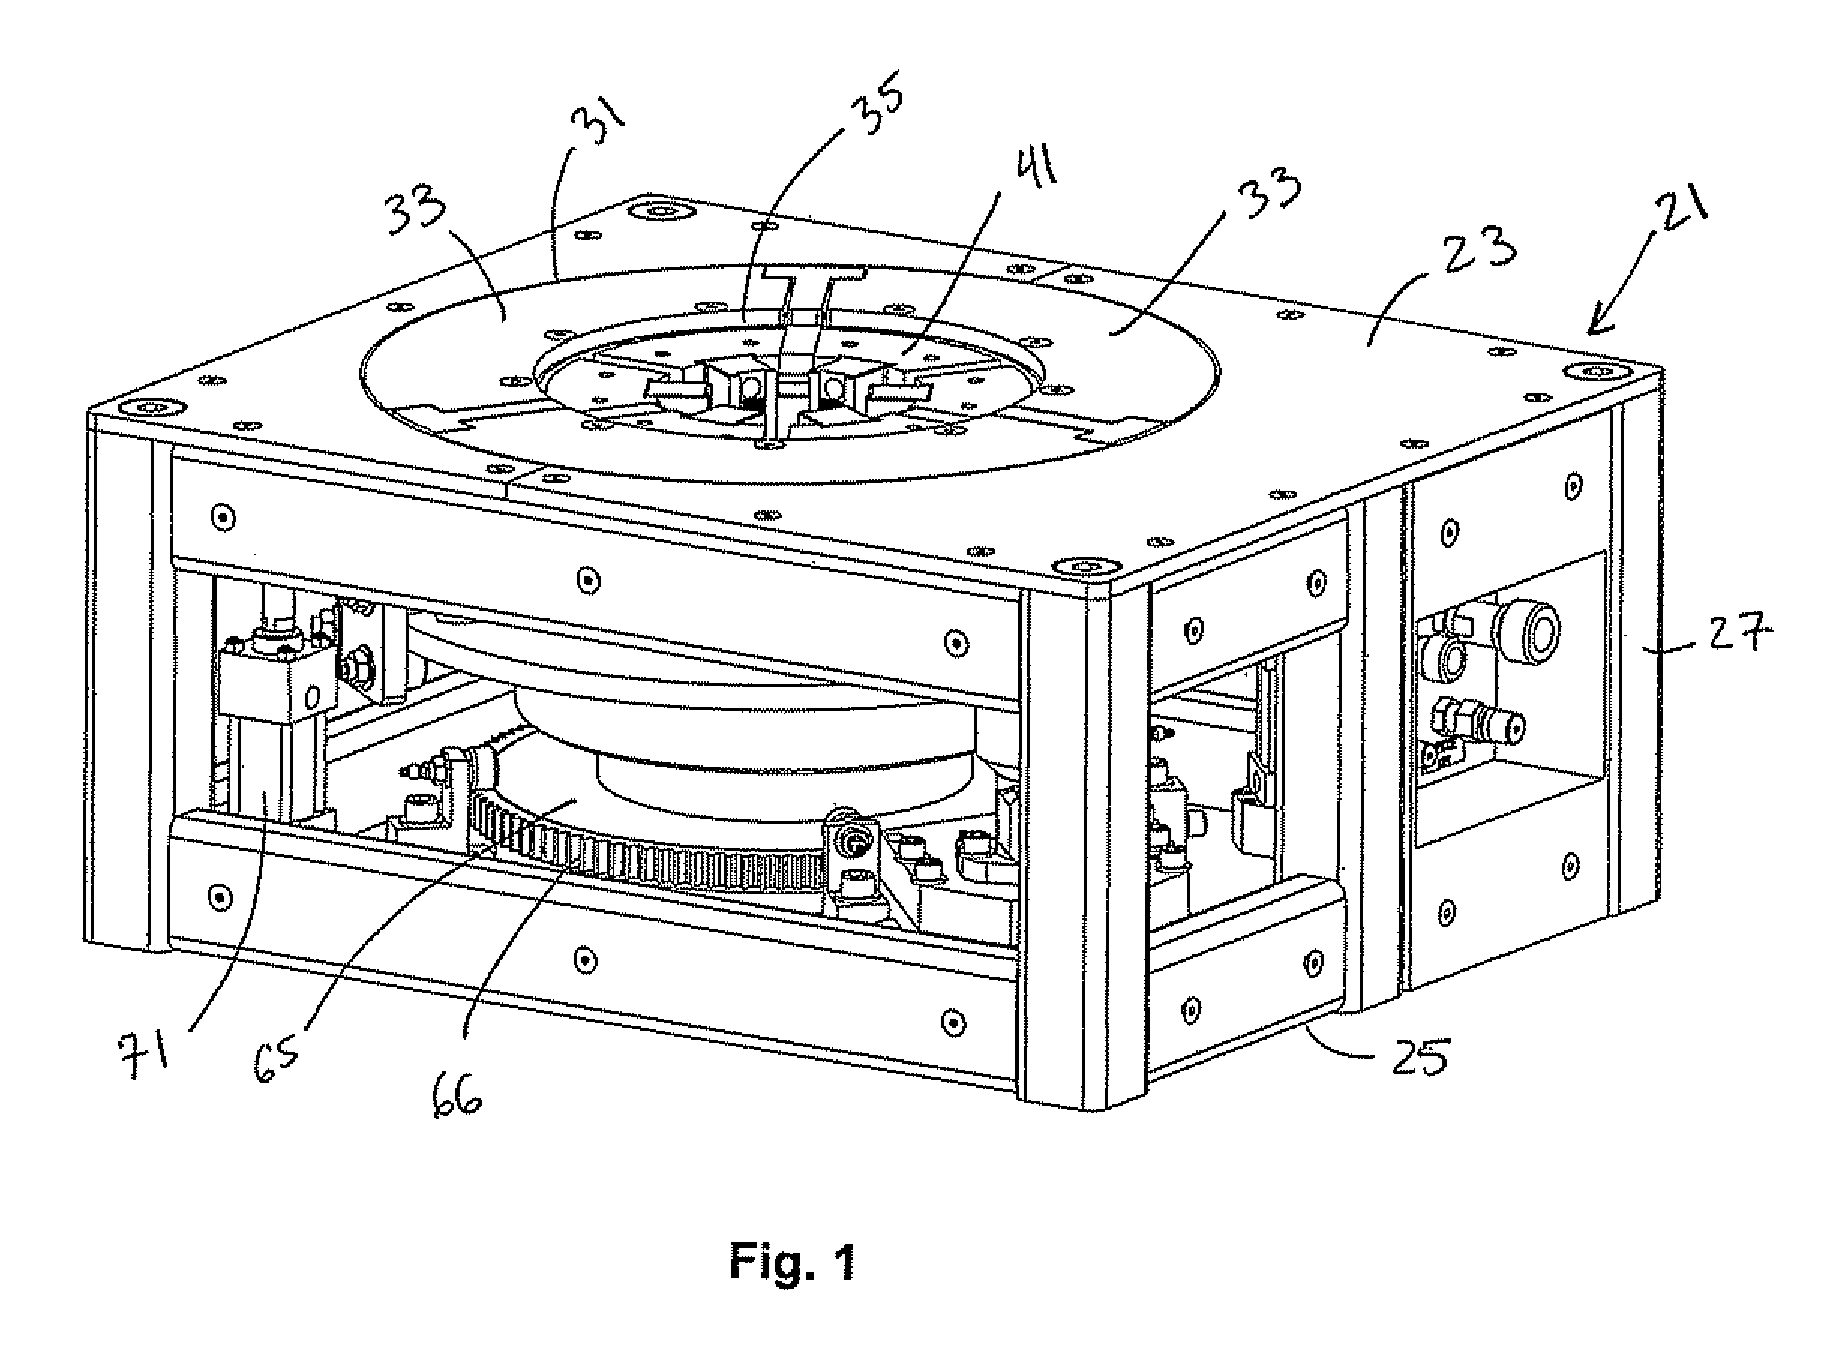 Mouse hole support unit with rotatable or stationary operation